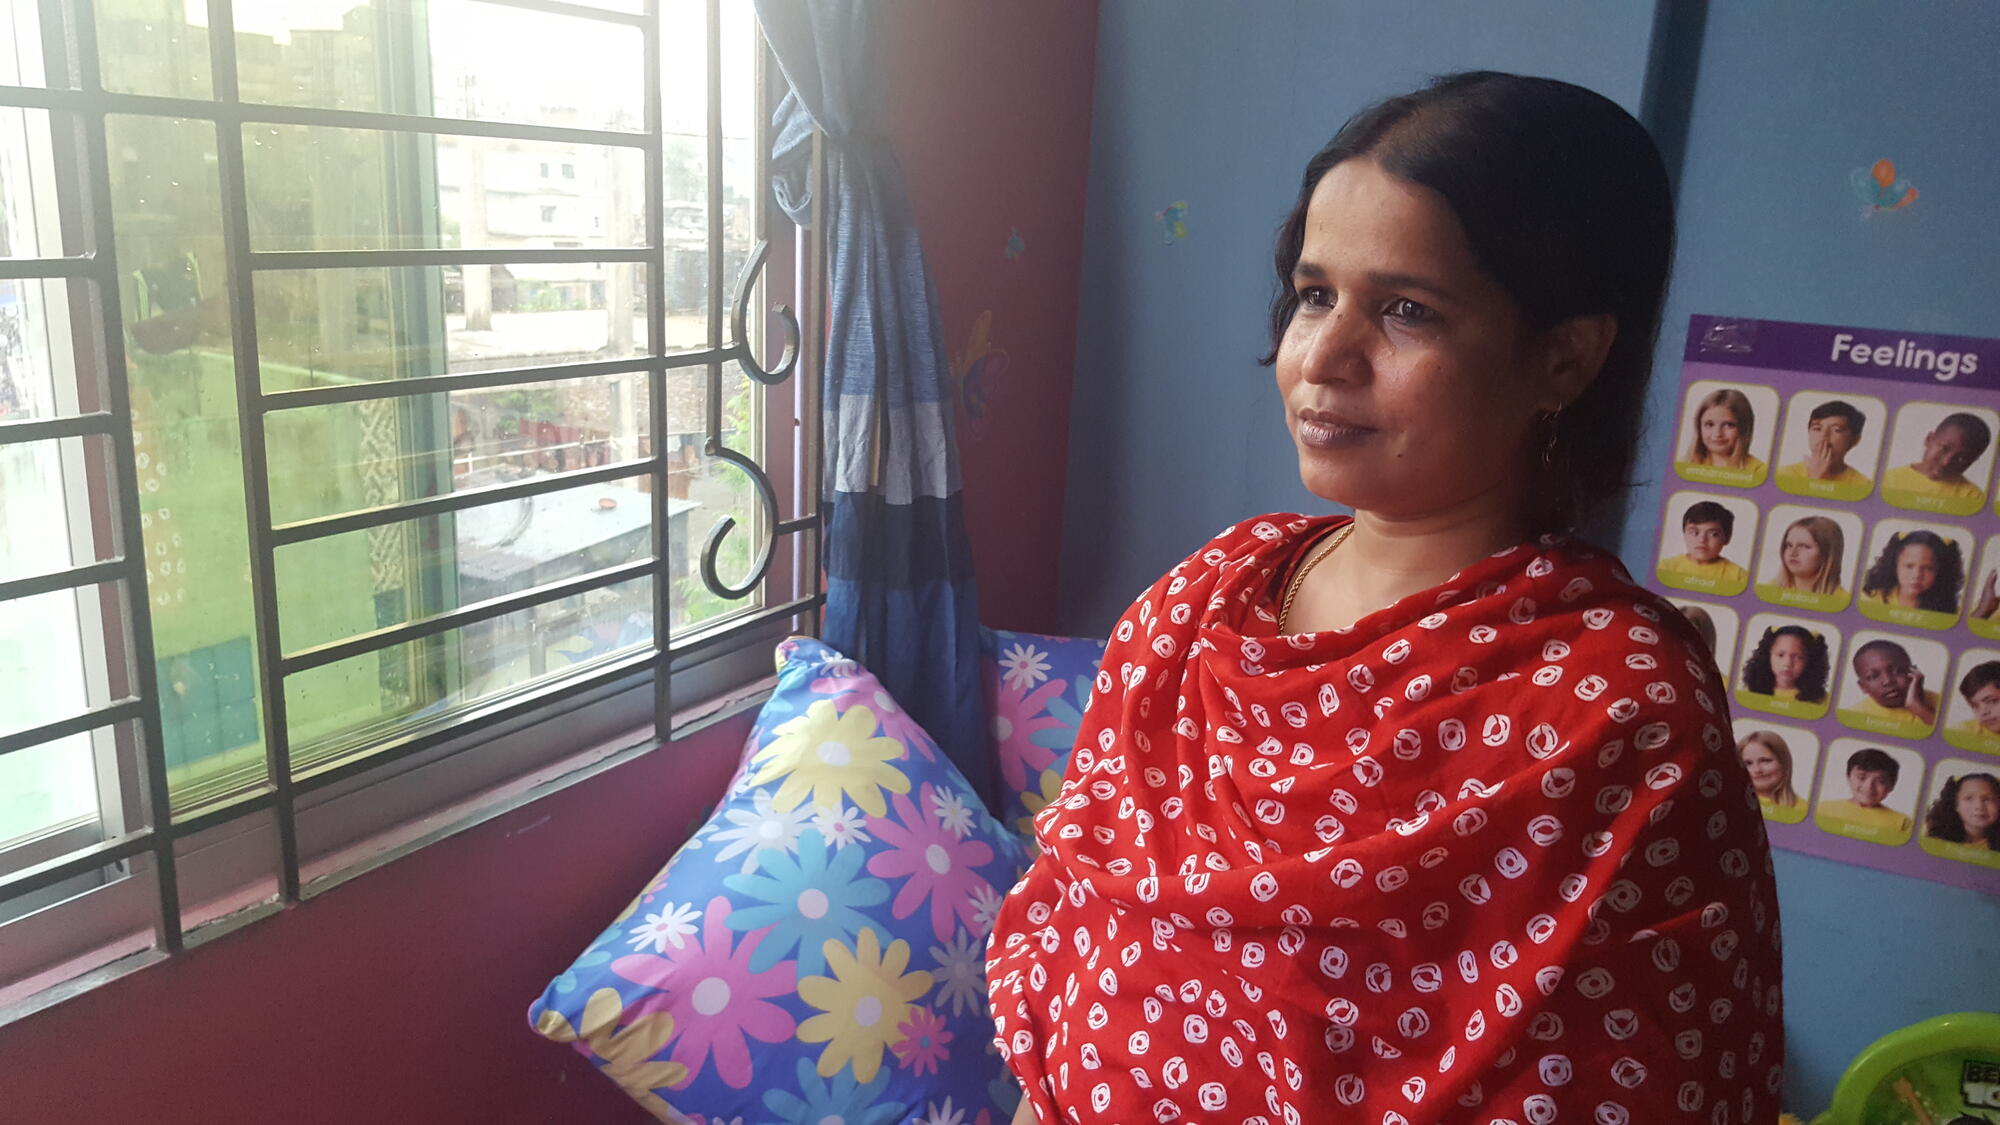 “When I began counselling, I was working with people affected by the Rana Plaza disaster and I was scared. 